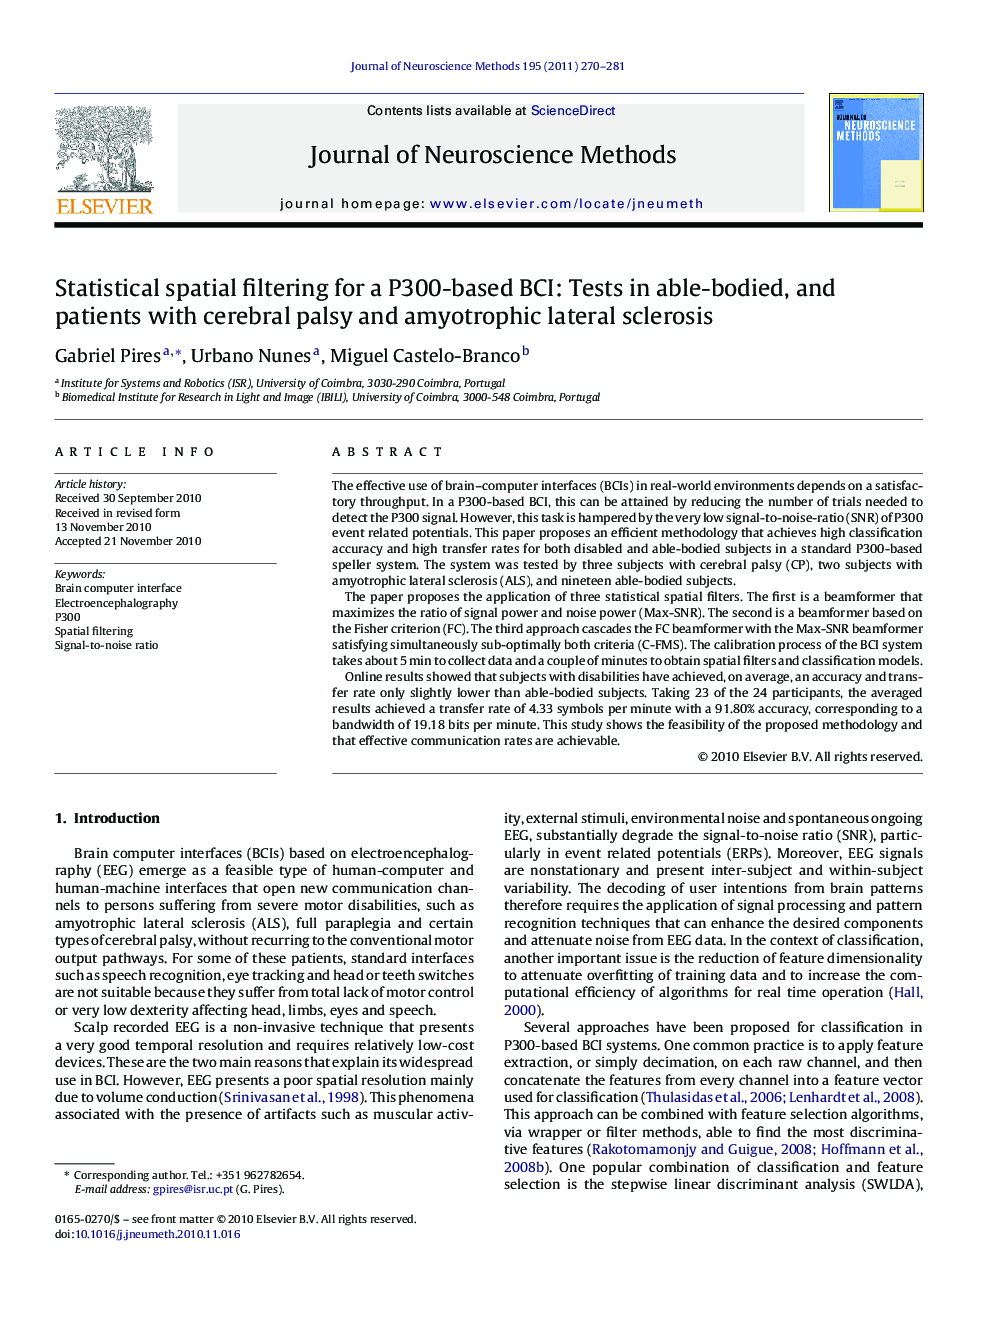 Statistical spatial filtering for a P300-based BCI: Tests in able-bodied, and patients with cerebral palsy and amyotrophic lateral sclerosis